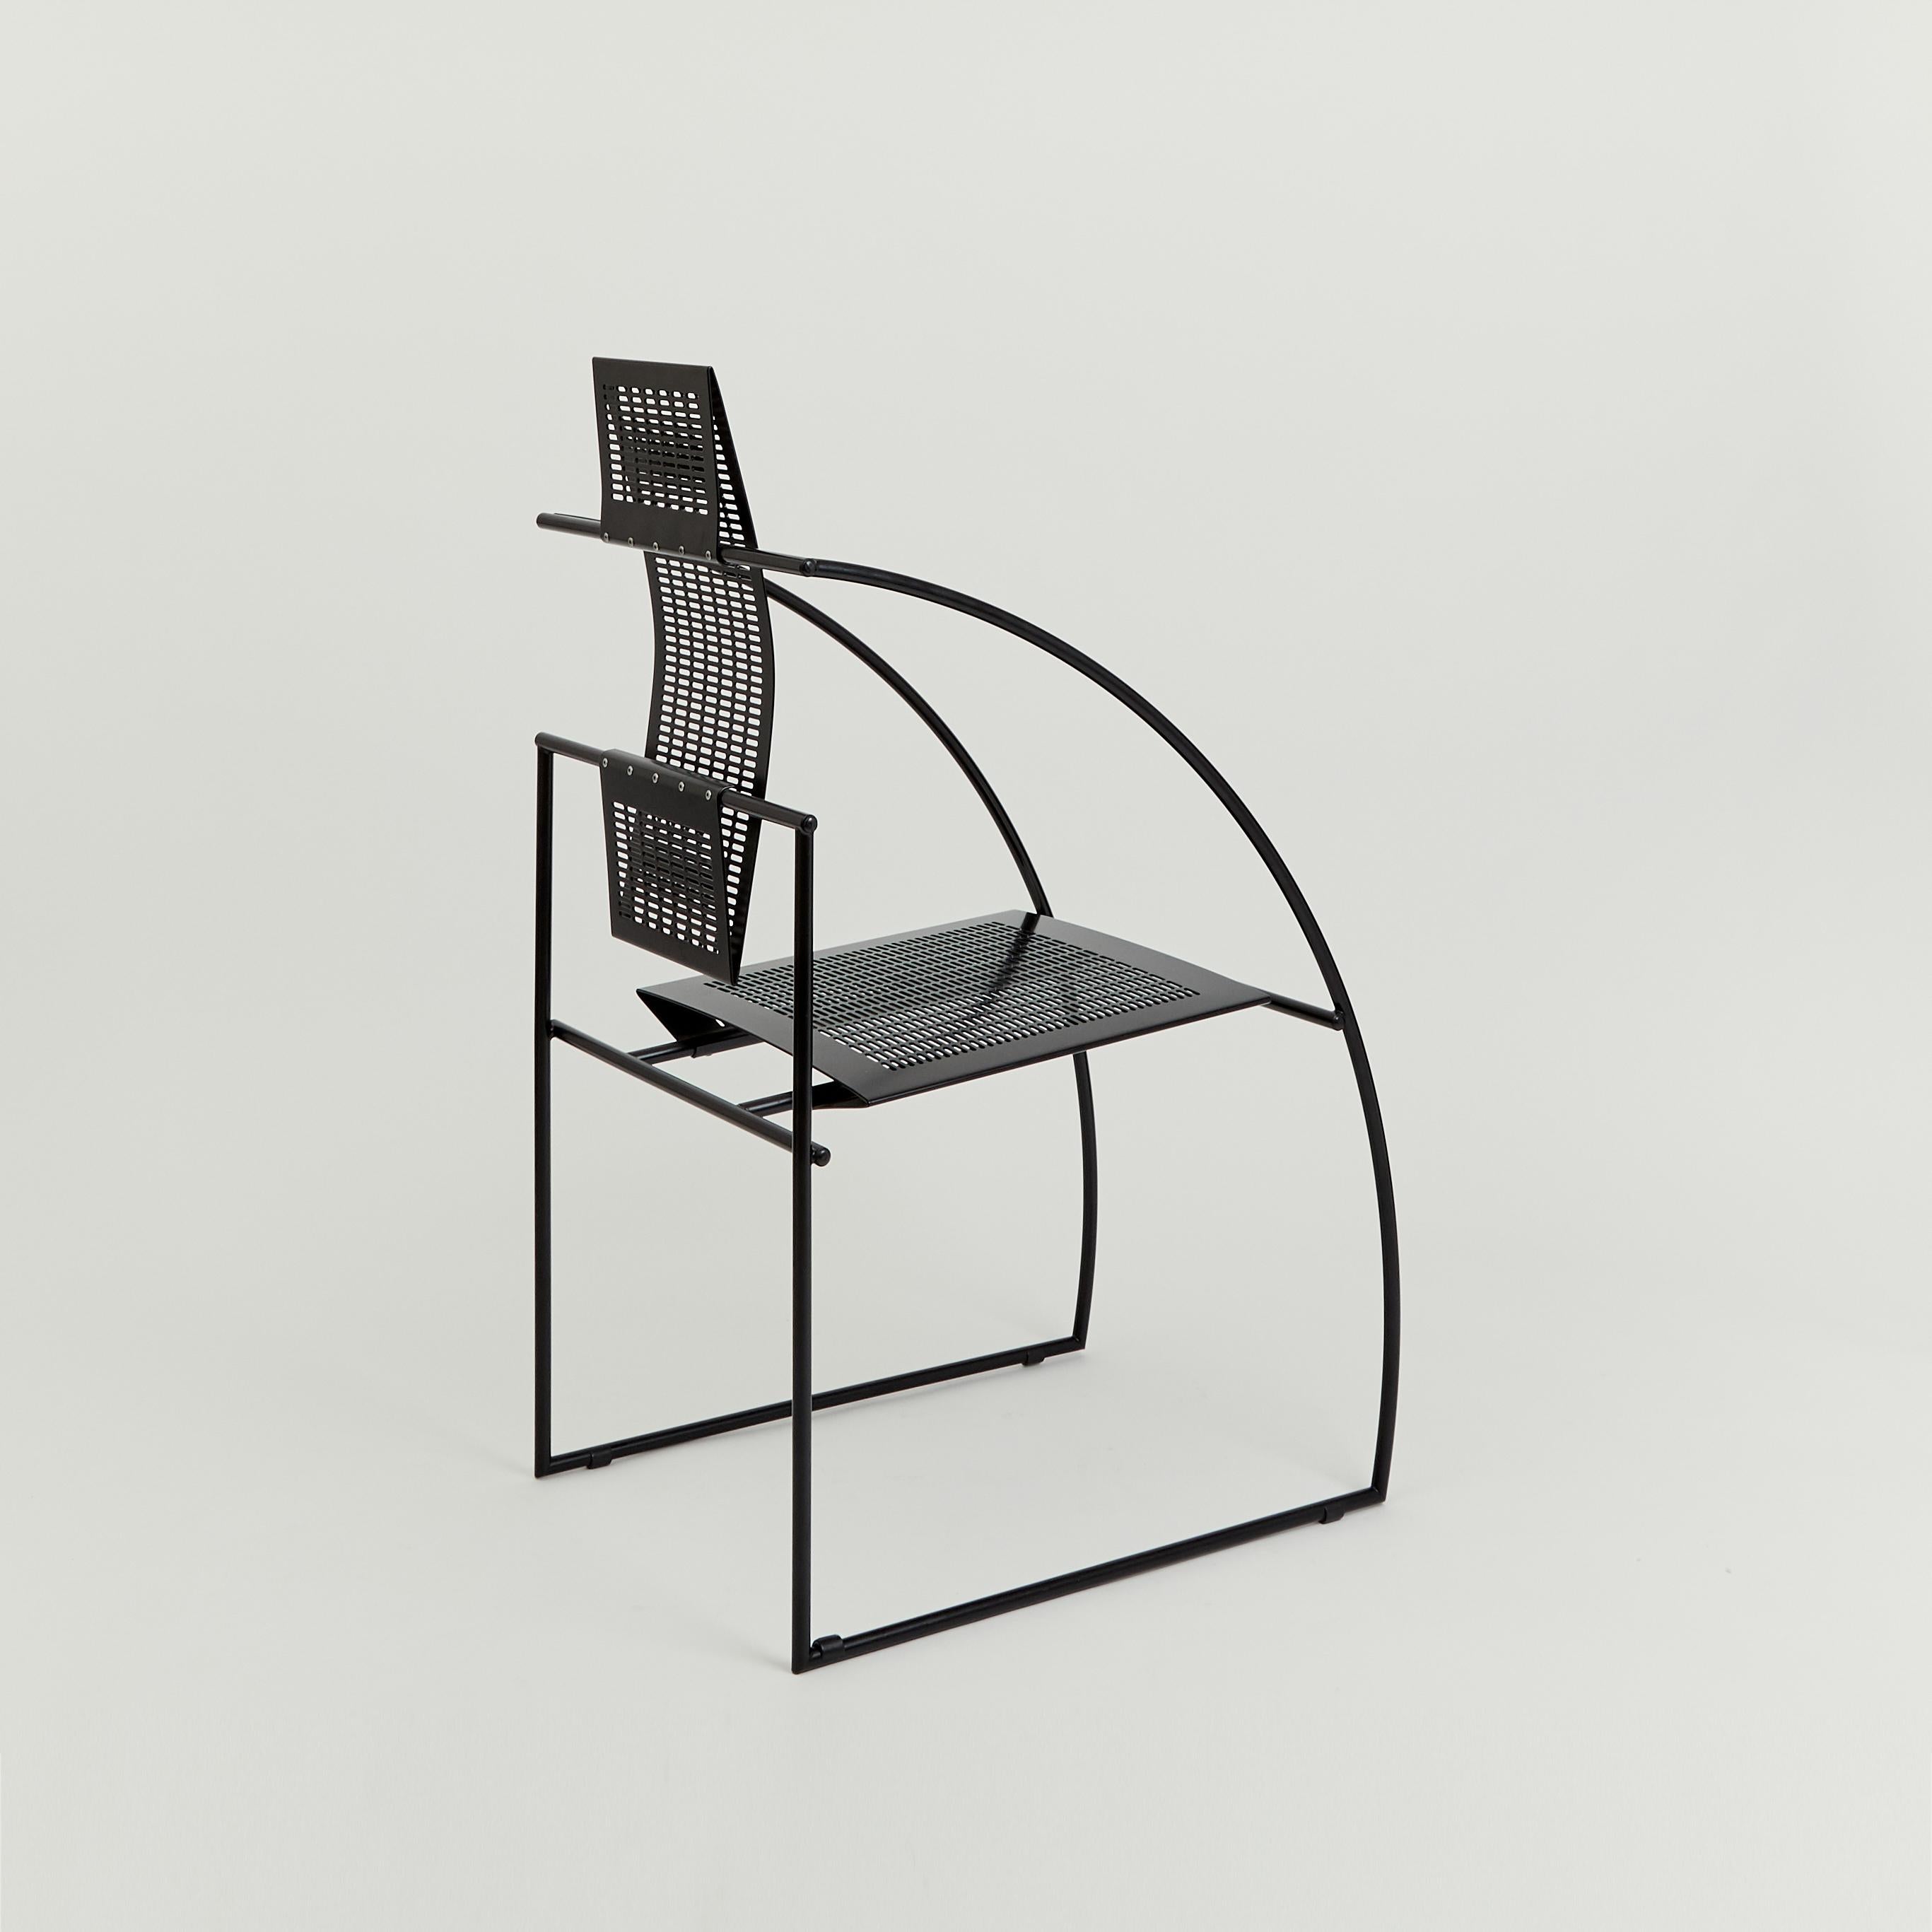 The iconic Quinta chair is constructed with a steel rod frame and folded perforated sheet-metal seat and back-rest. Designed in 1985, this iconic chair shows the influence of Botta's mentors including Le Corbusier, Louis Kahn and Carlo